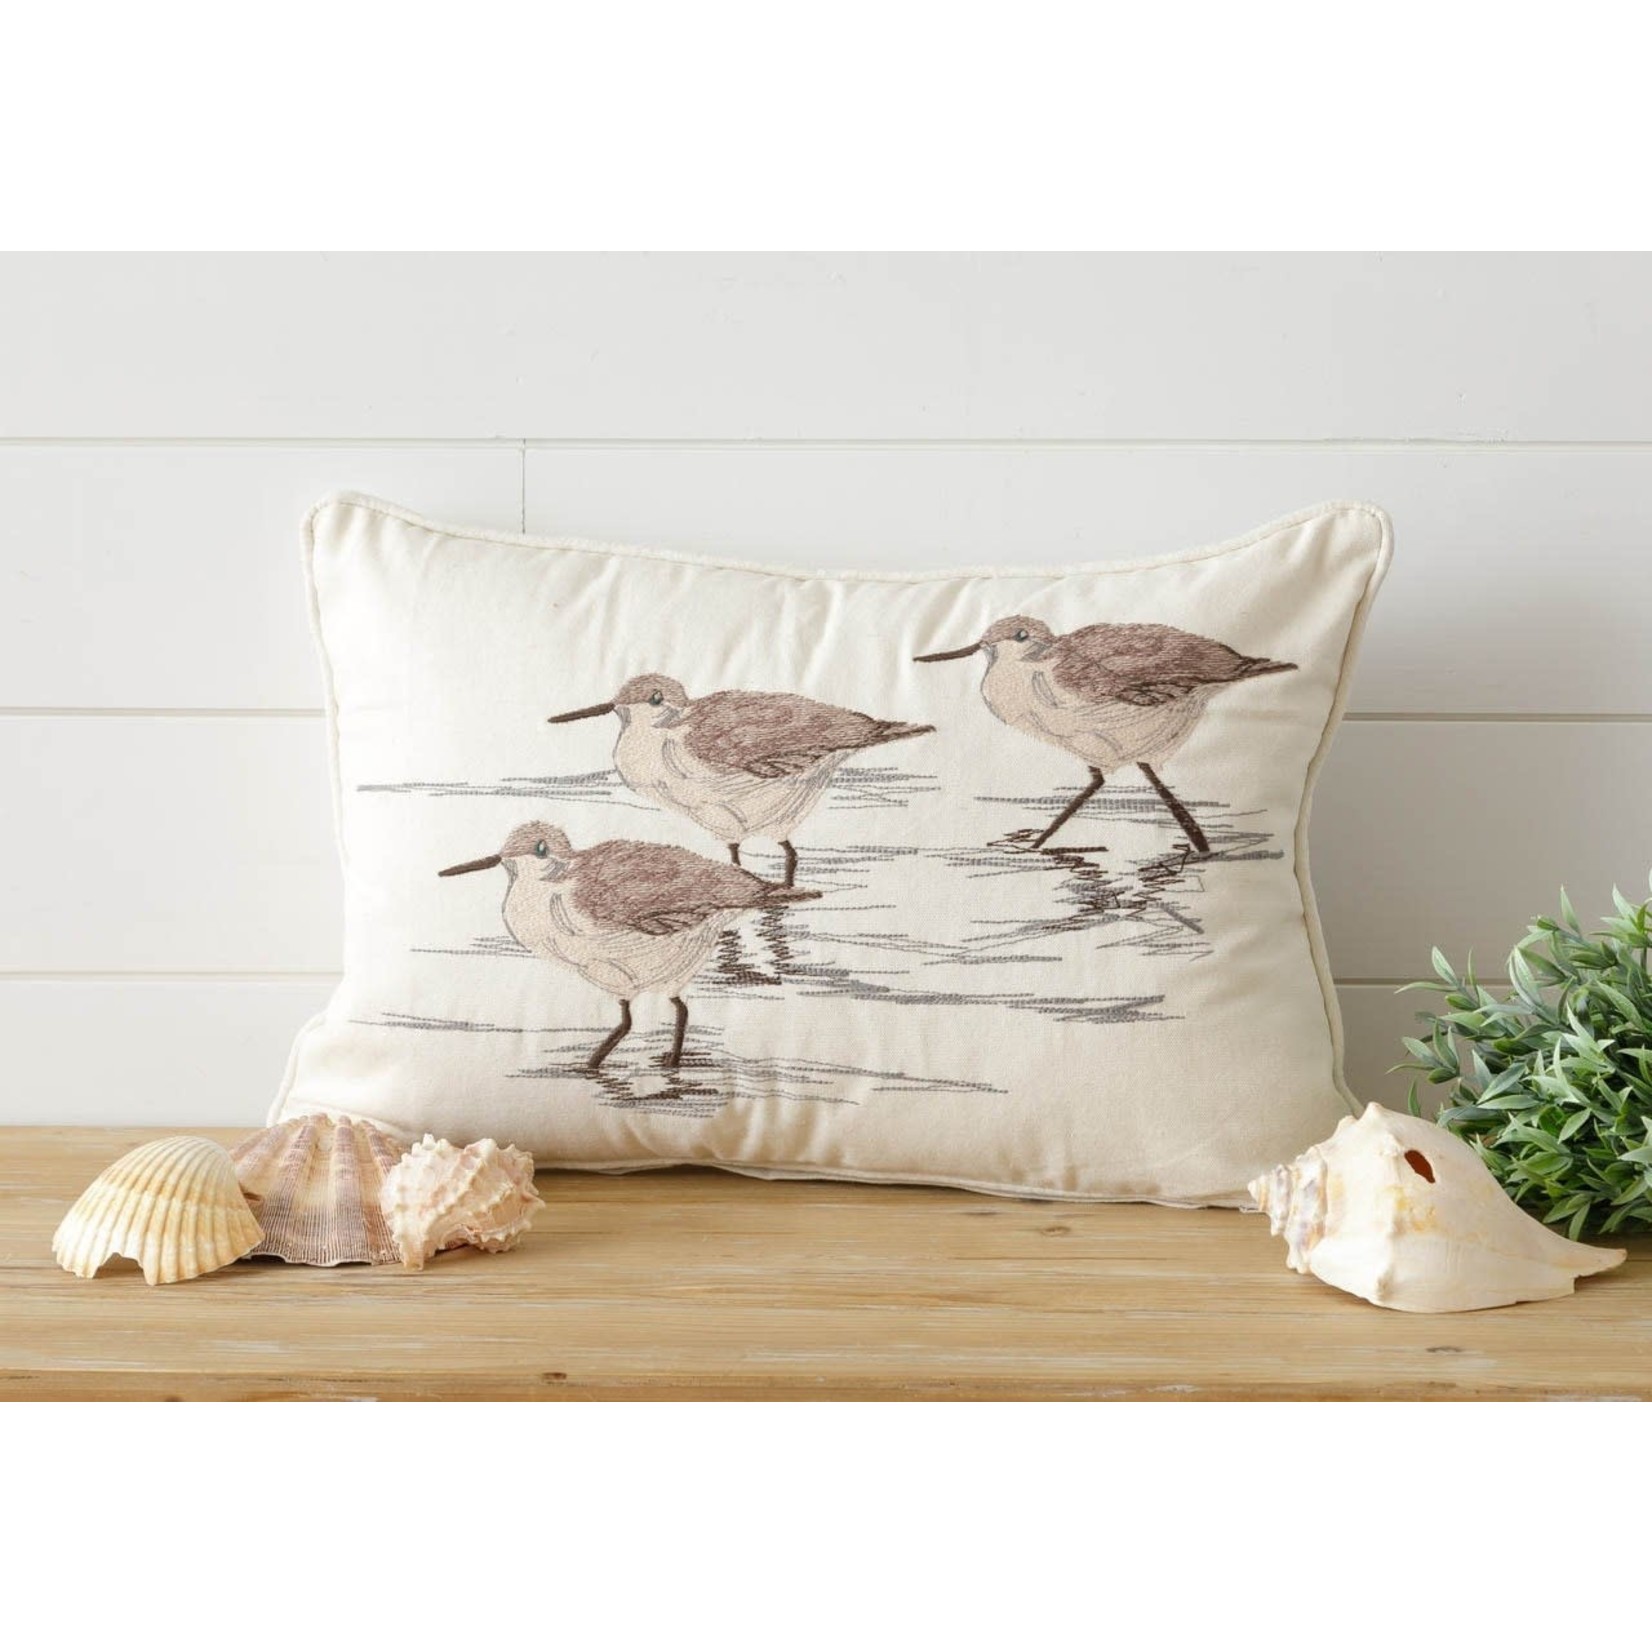 Embroidered Sandpiper Pillow